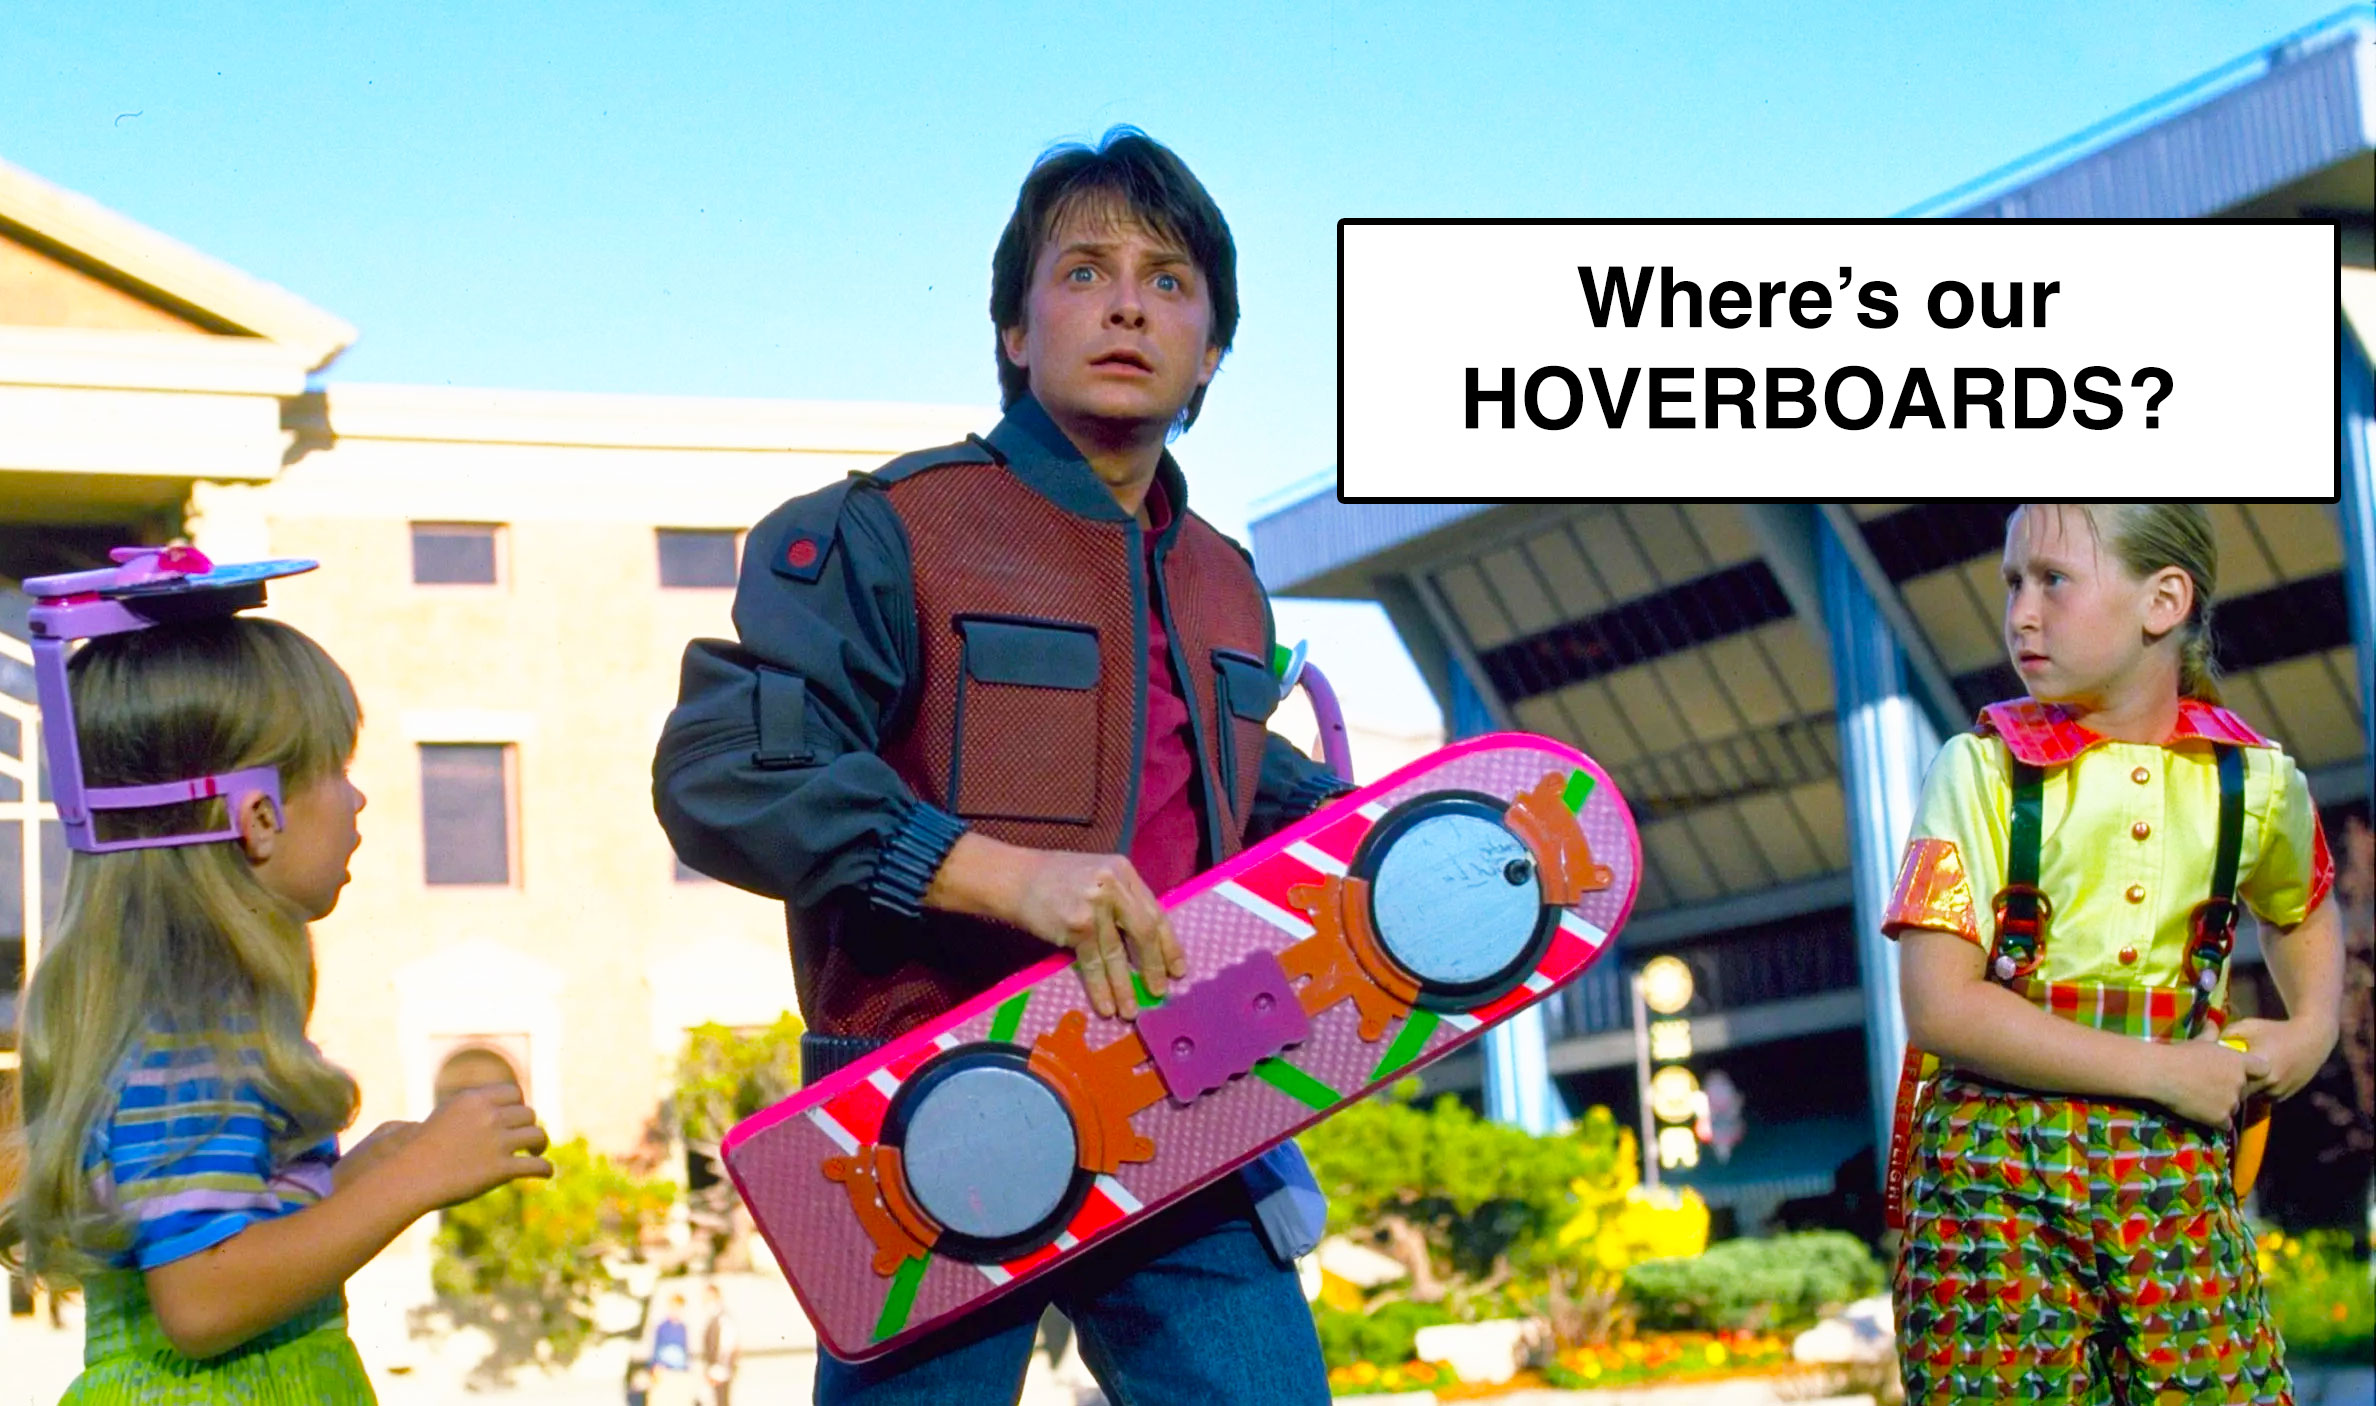 A person holding a pink hoverboard looks surprised or confused. To the left, a young child in a blue and pink outfit, and to the right, another child in a multicolored outfit. The text in the image says, "Where’s our HOVERBOARDS?" The background shows a modern building.